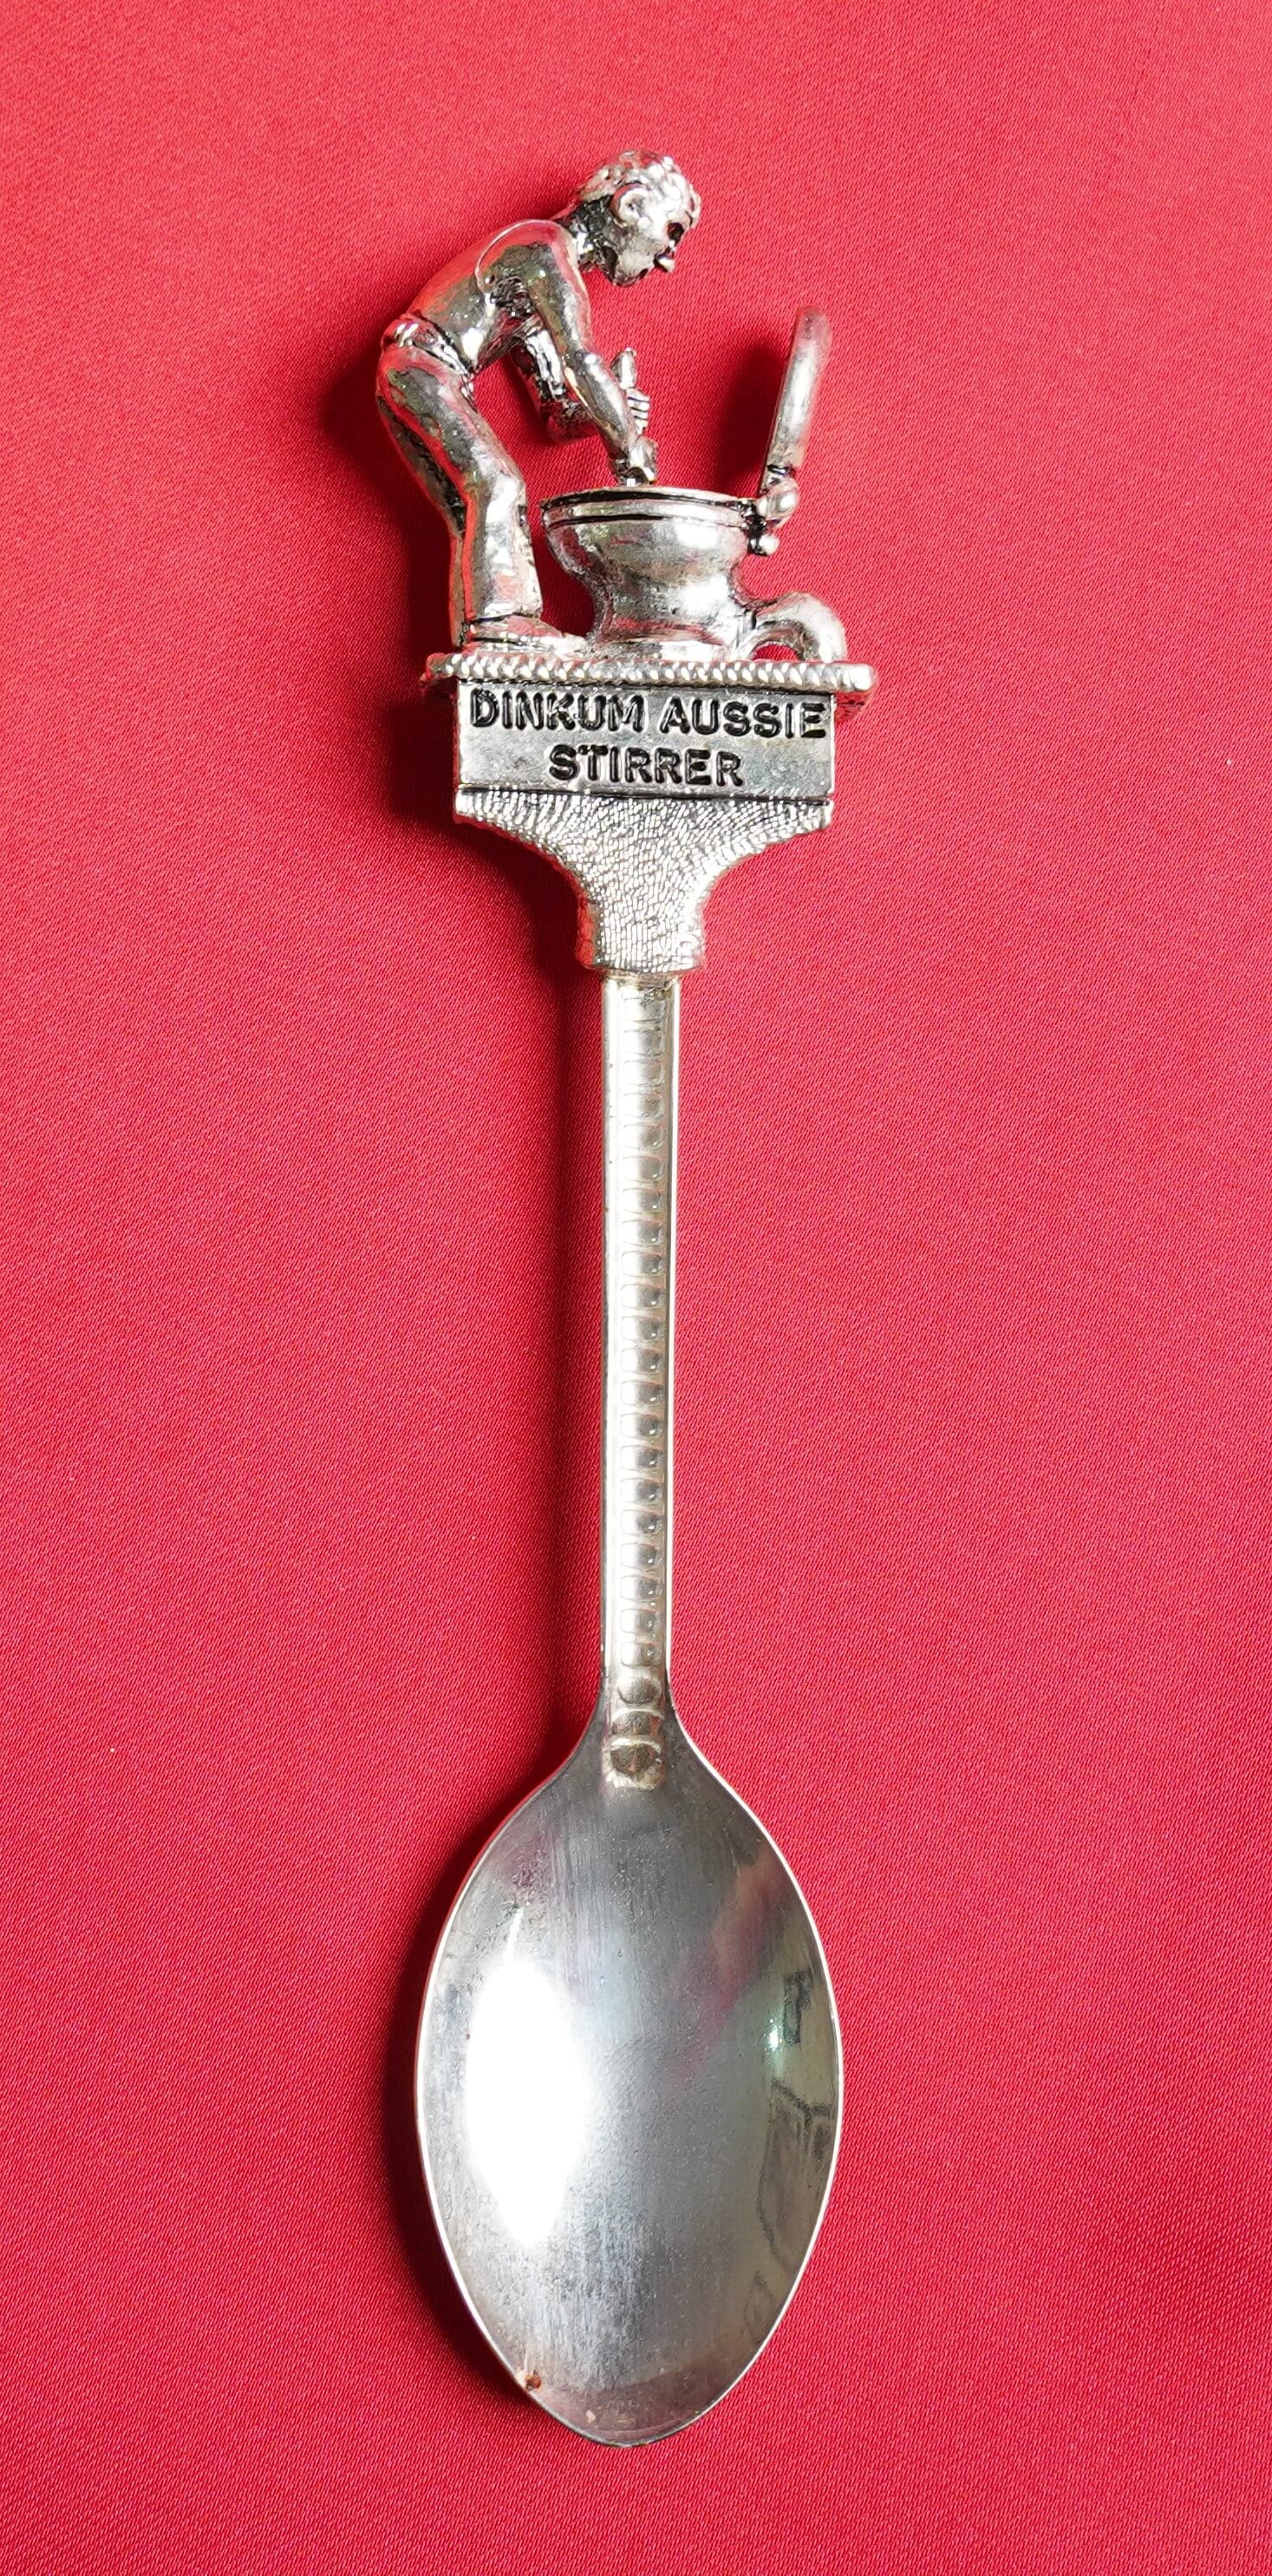 Collectable spoon series from Australia - shopeeeys